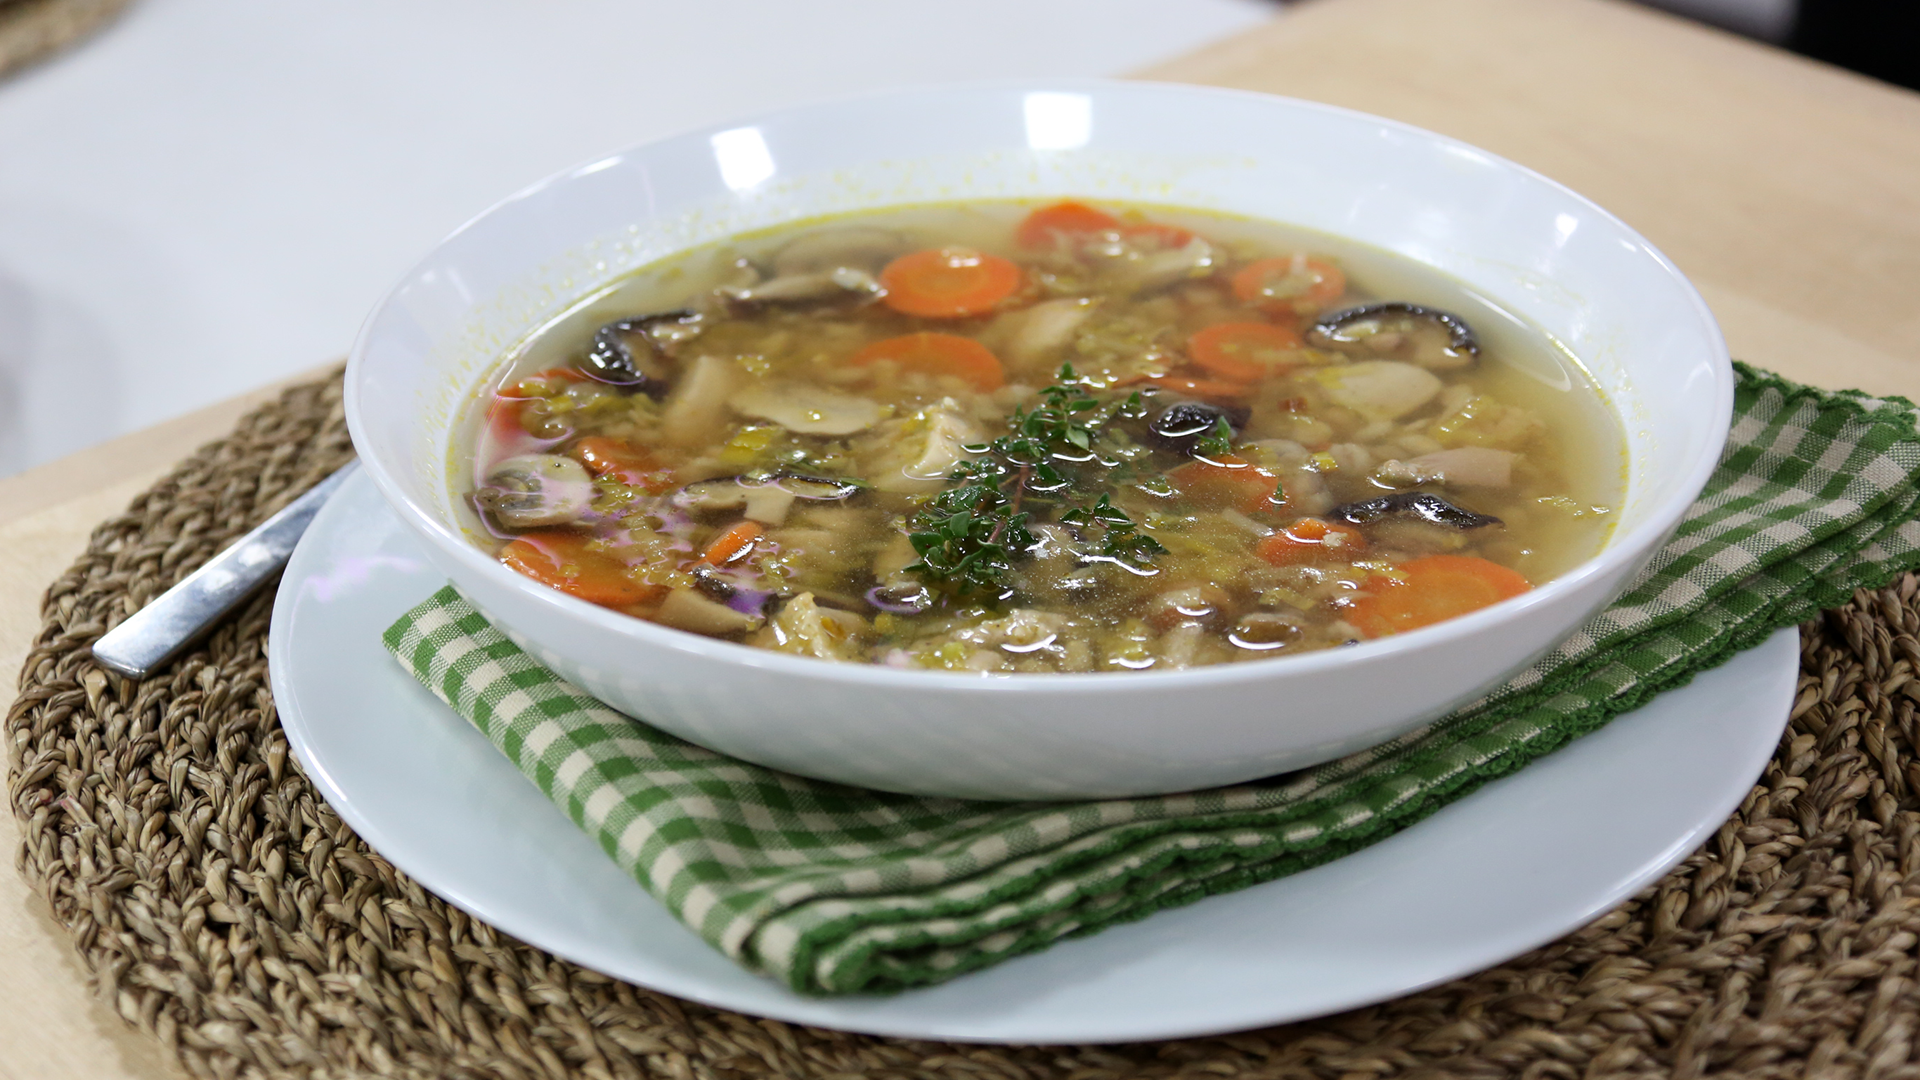 Chicken soup with mushrooms and barley